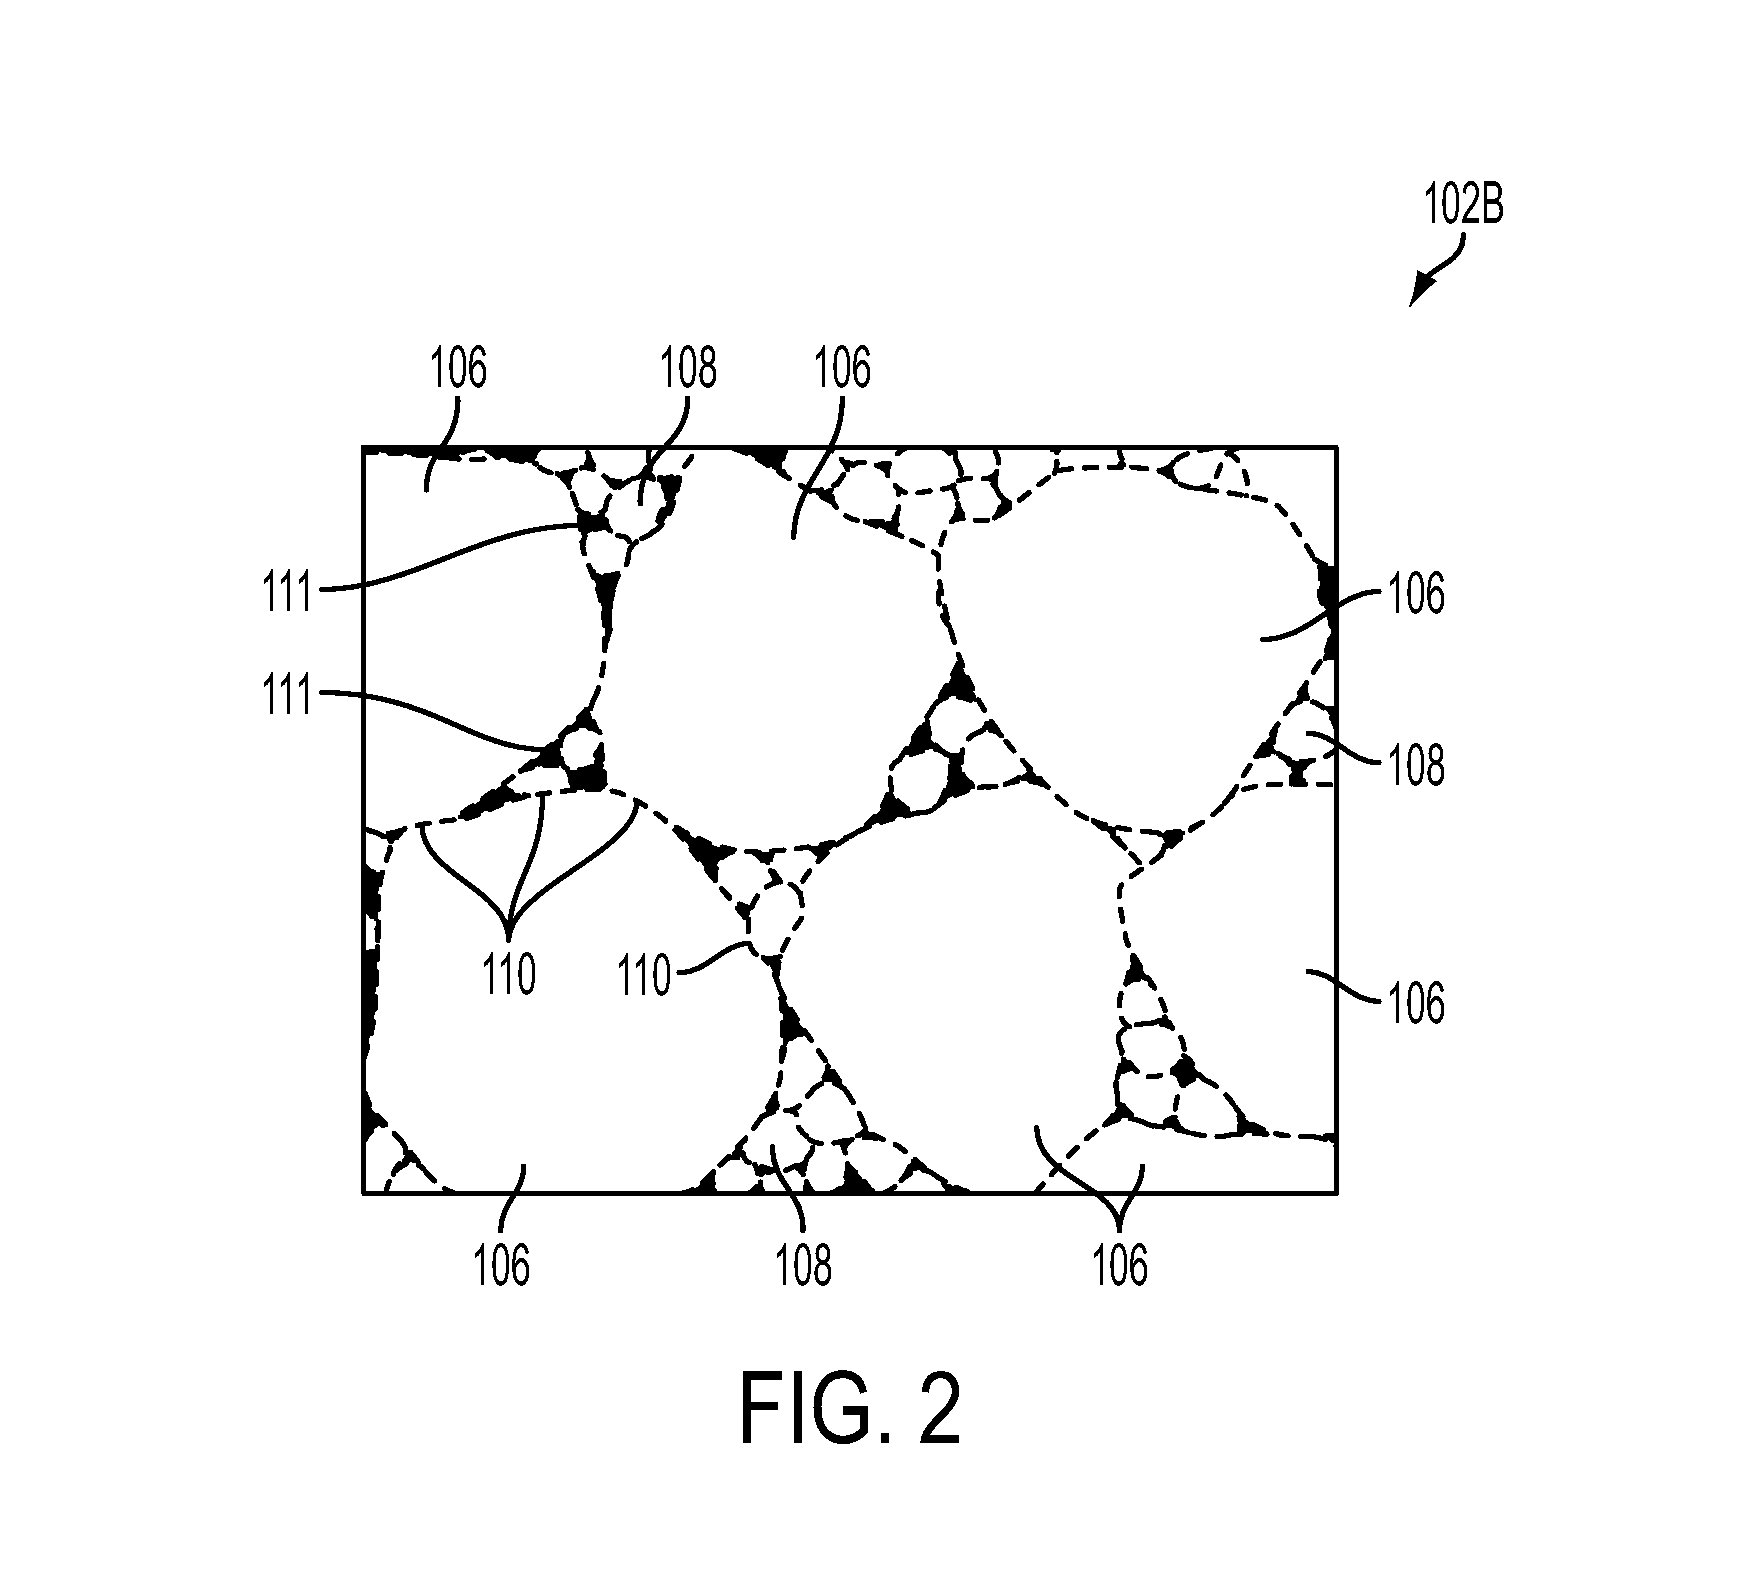 Methods of forming a cutting element for an earth-boring tool, a related cutting element, and an earth-boring tool including such a cutting element